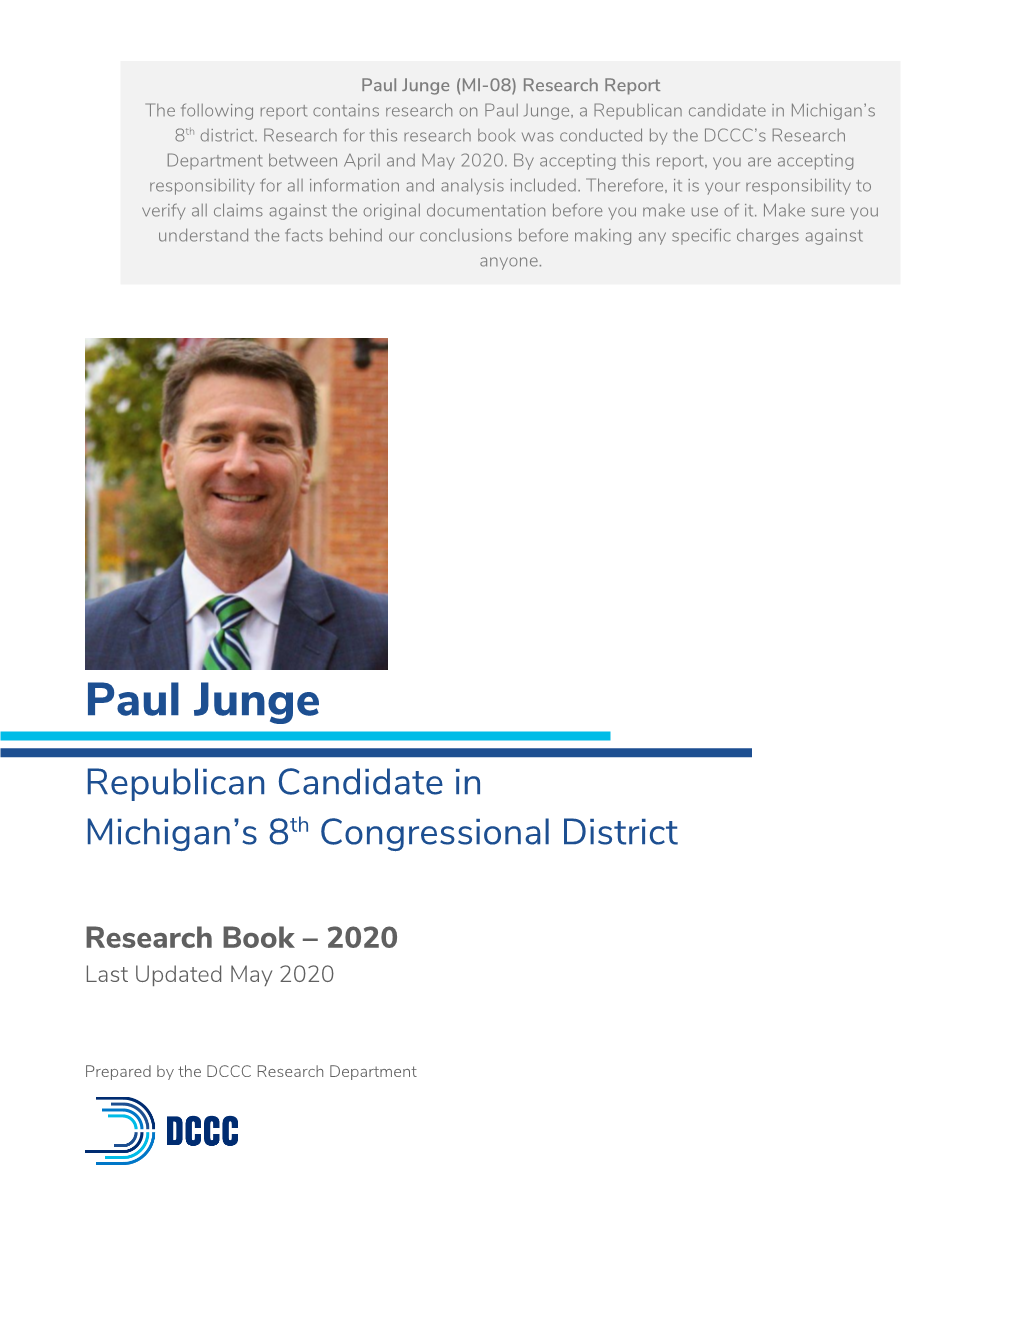 Paul Junge (MI-08) Research Report the Following Report Contains Research on Paul Junge, a Republican Candidate in Michigan’S 8Th District